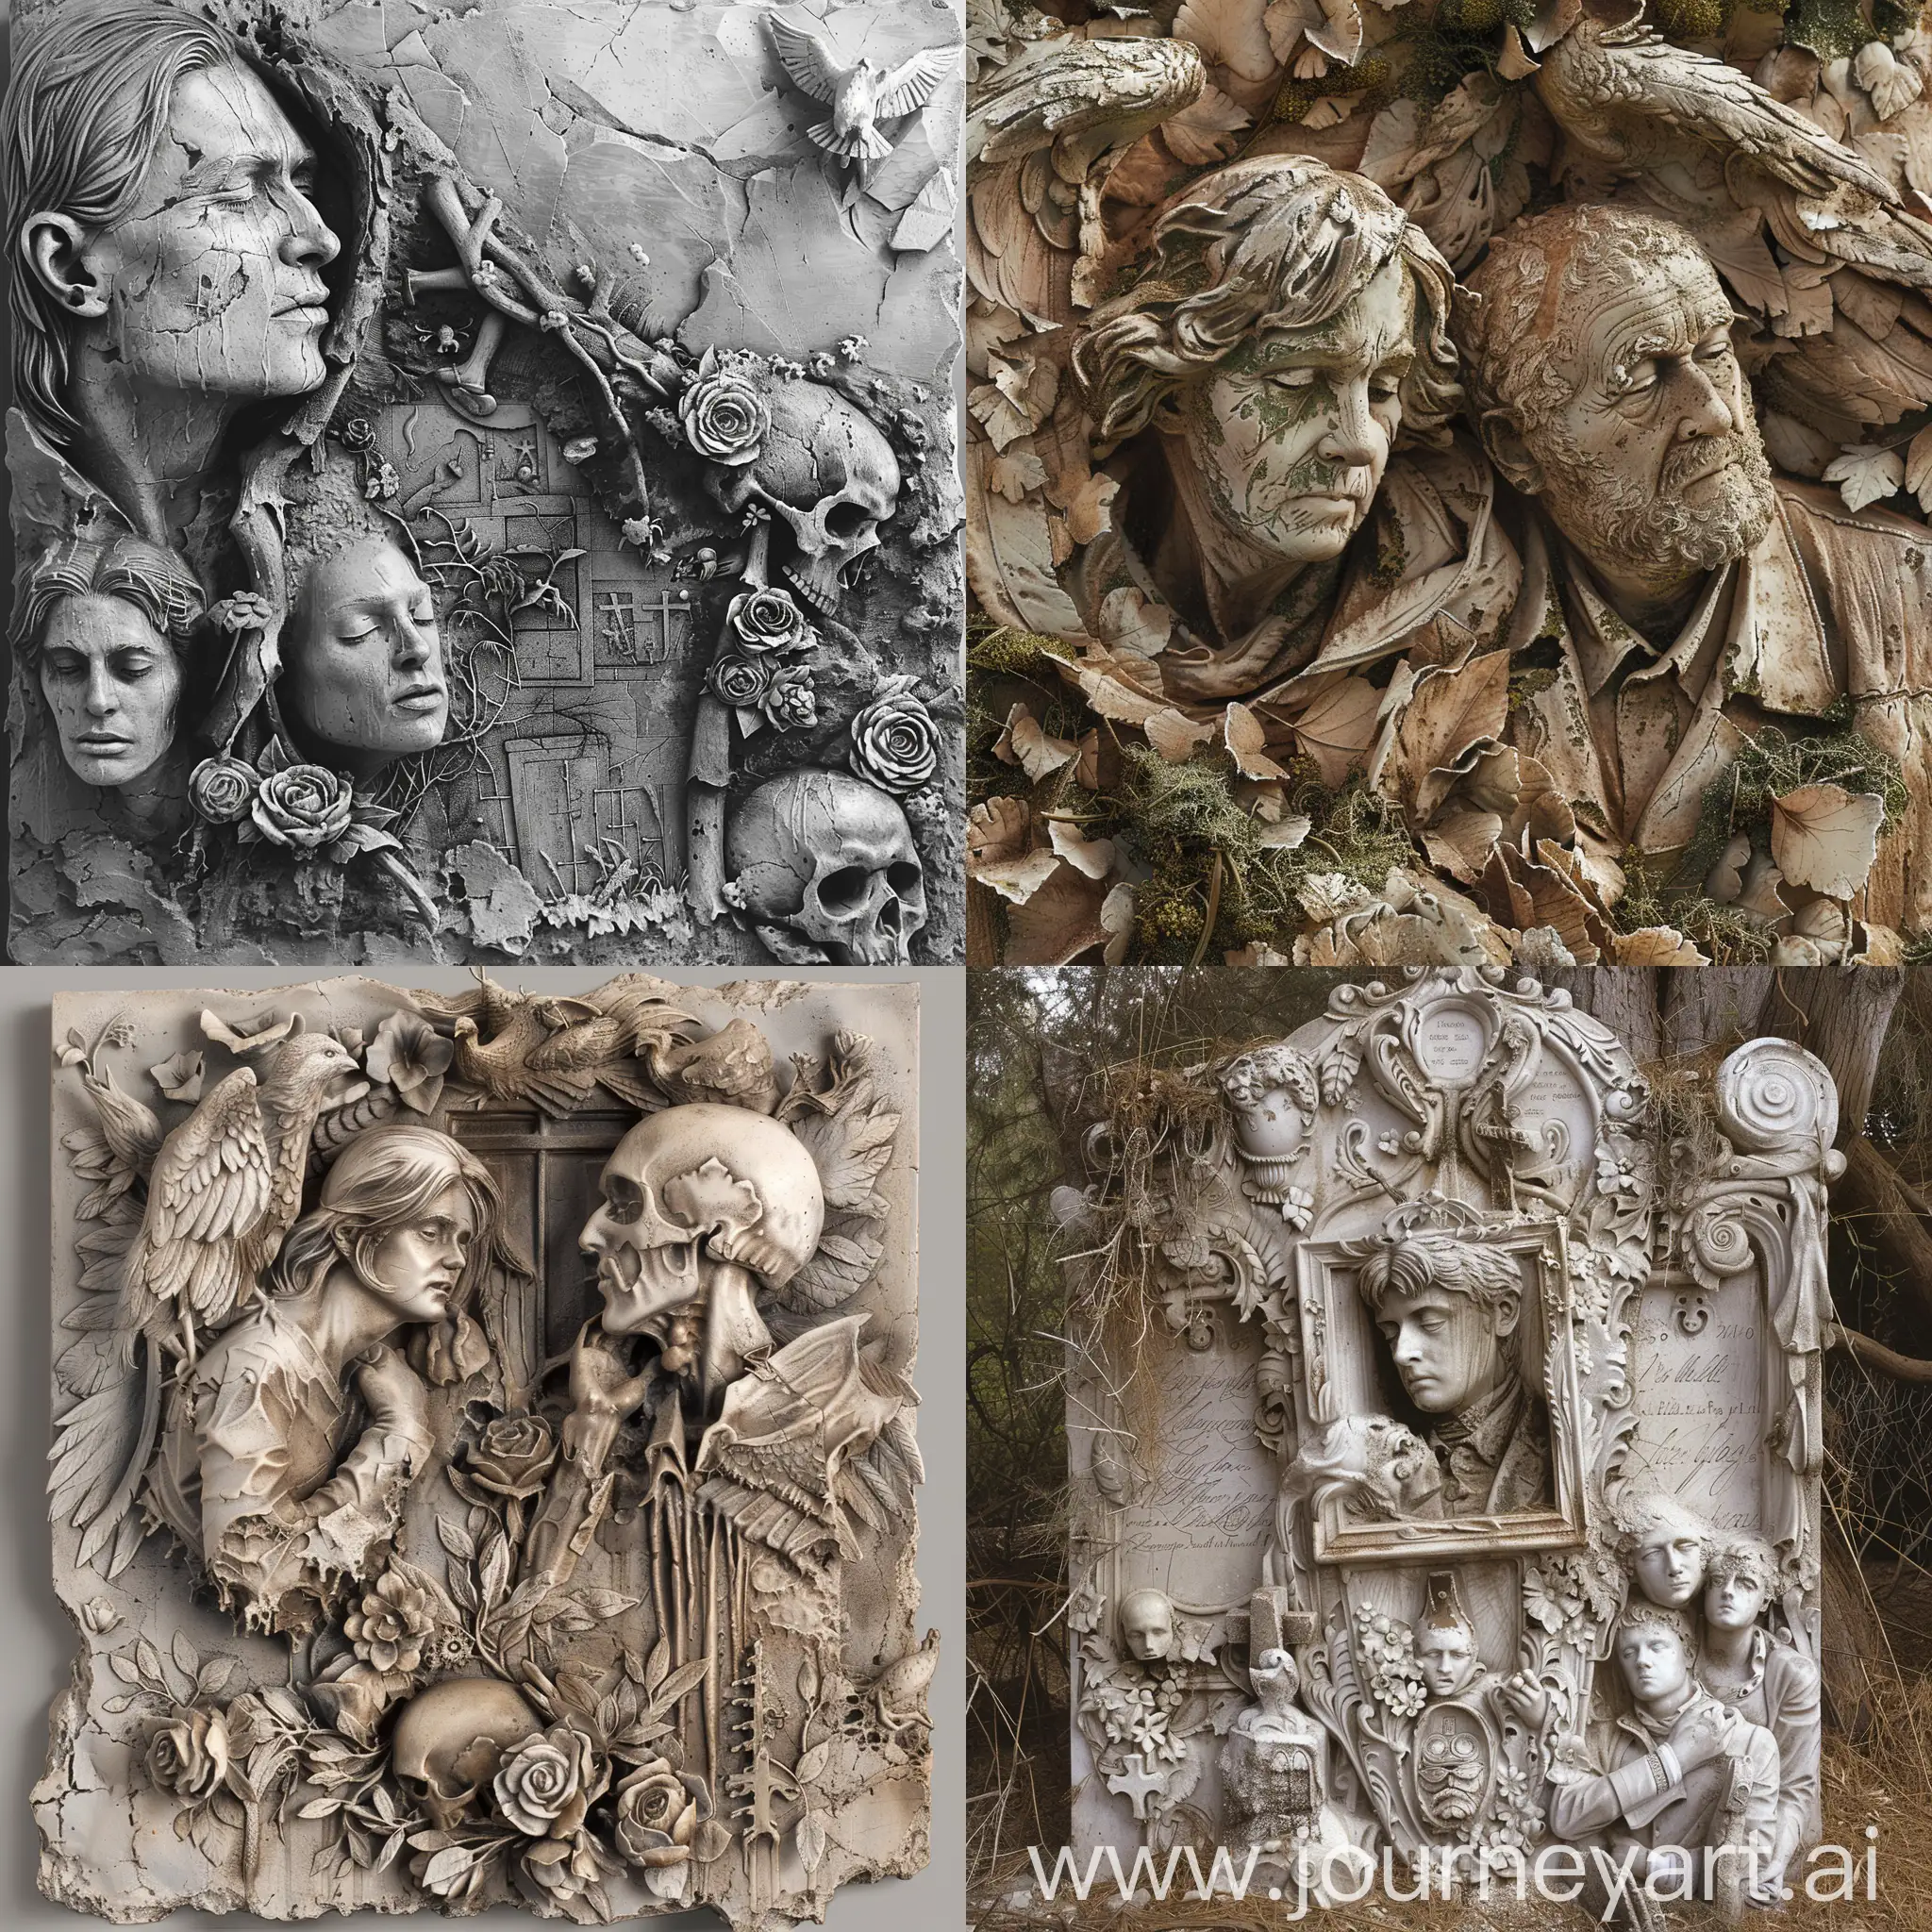 Unique-Memorial-Grave-Images-Expressing-Respect-and-Individuality